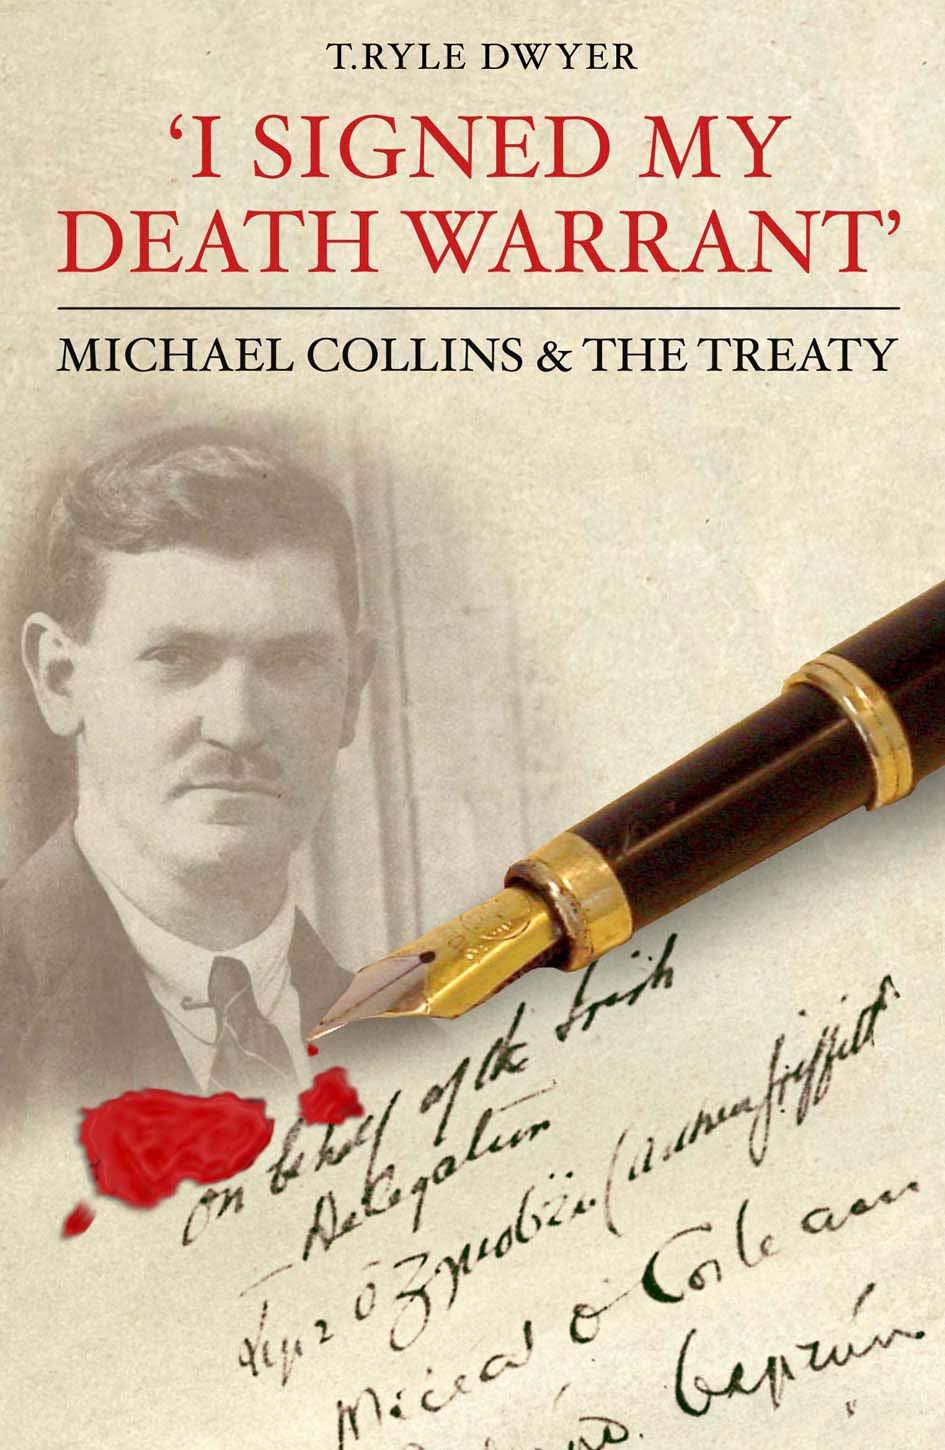 I Signed My Death Warrant - Michael Collins & the Treaty